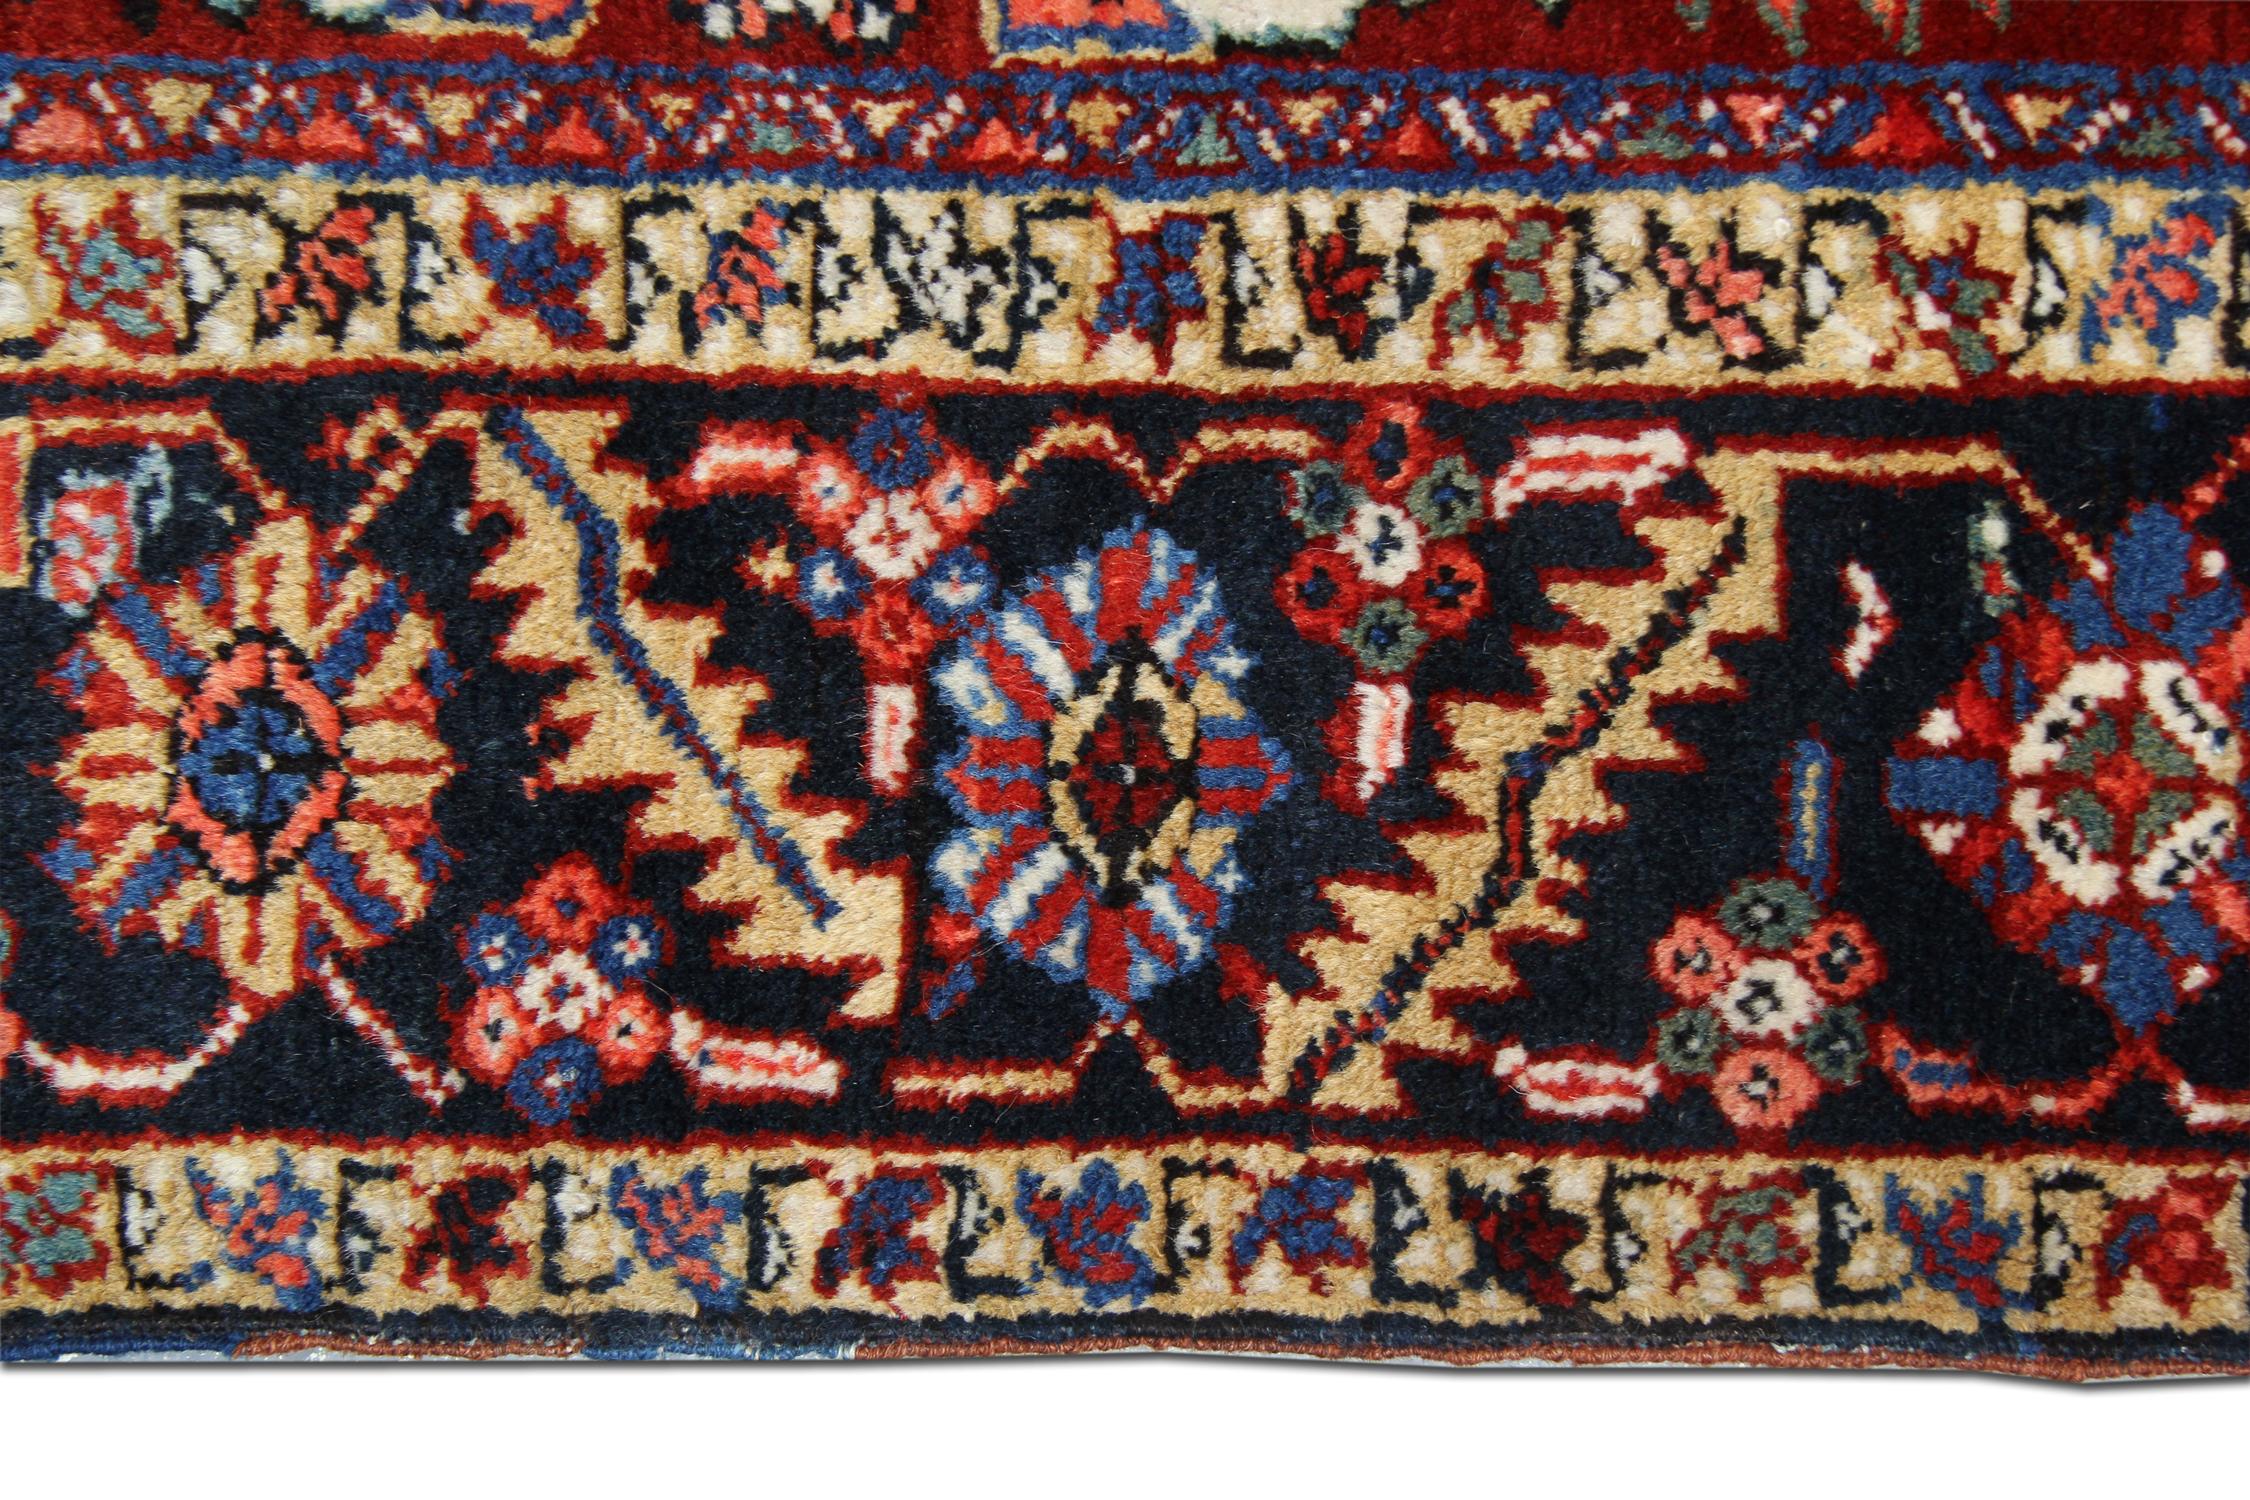 Second hand Antique rugs are great accessories to uplift a dull space. This stylish carpet has been woven by hand with a rich deep red background and accents of yellow, orange, ivory and blue that make up the decorative, symmetrical tribal design.